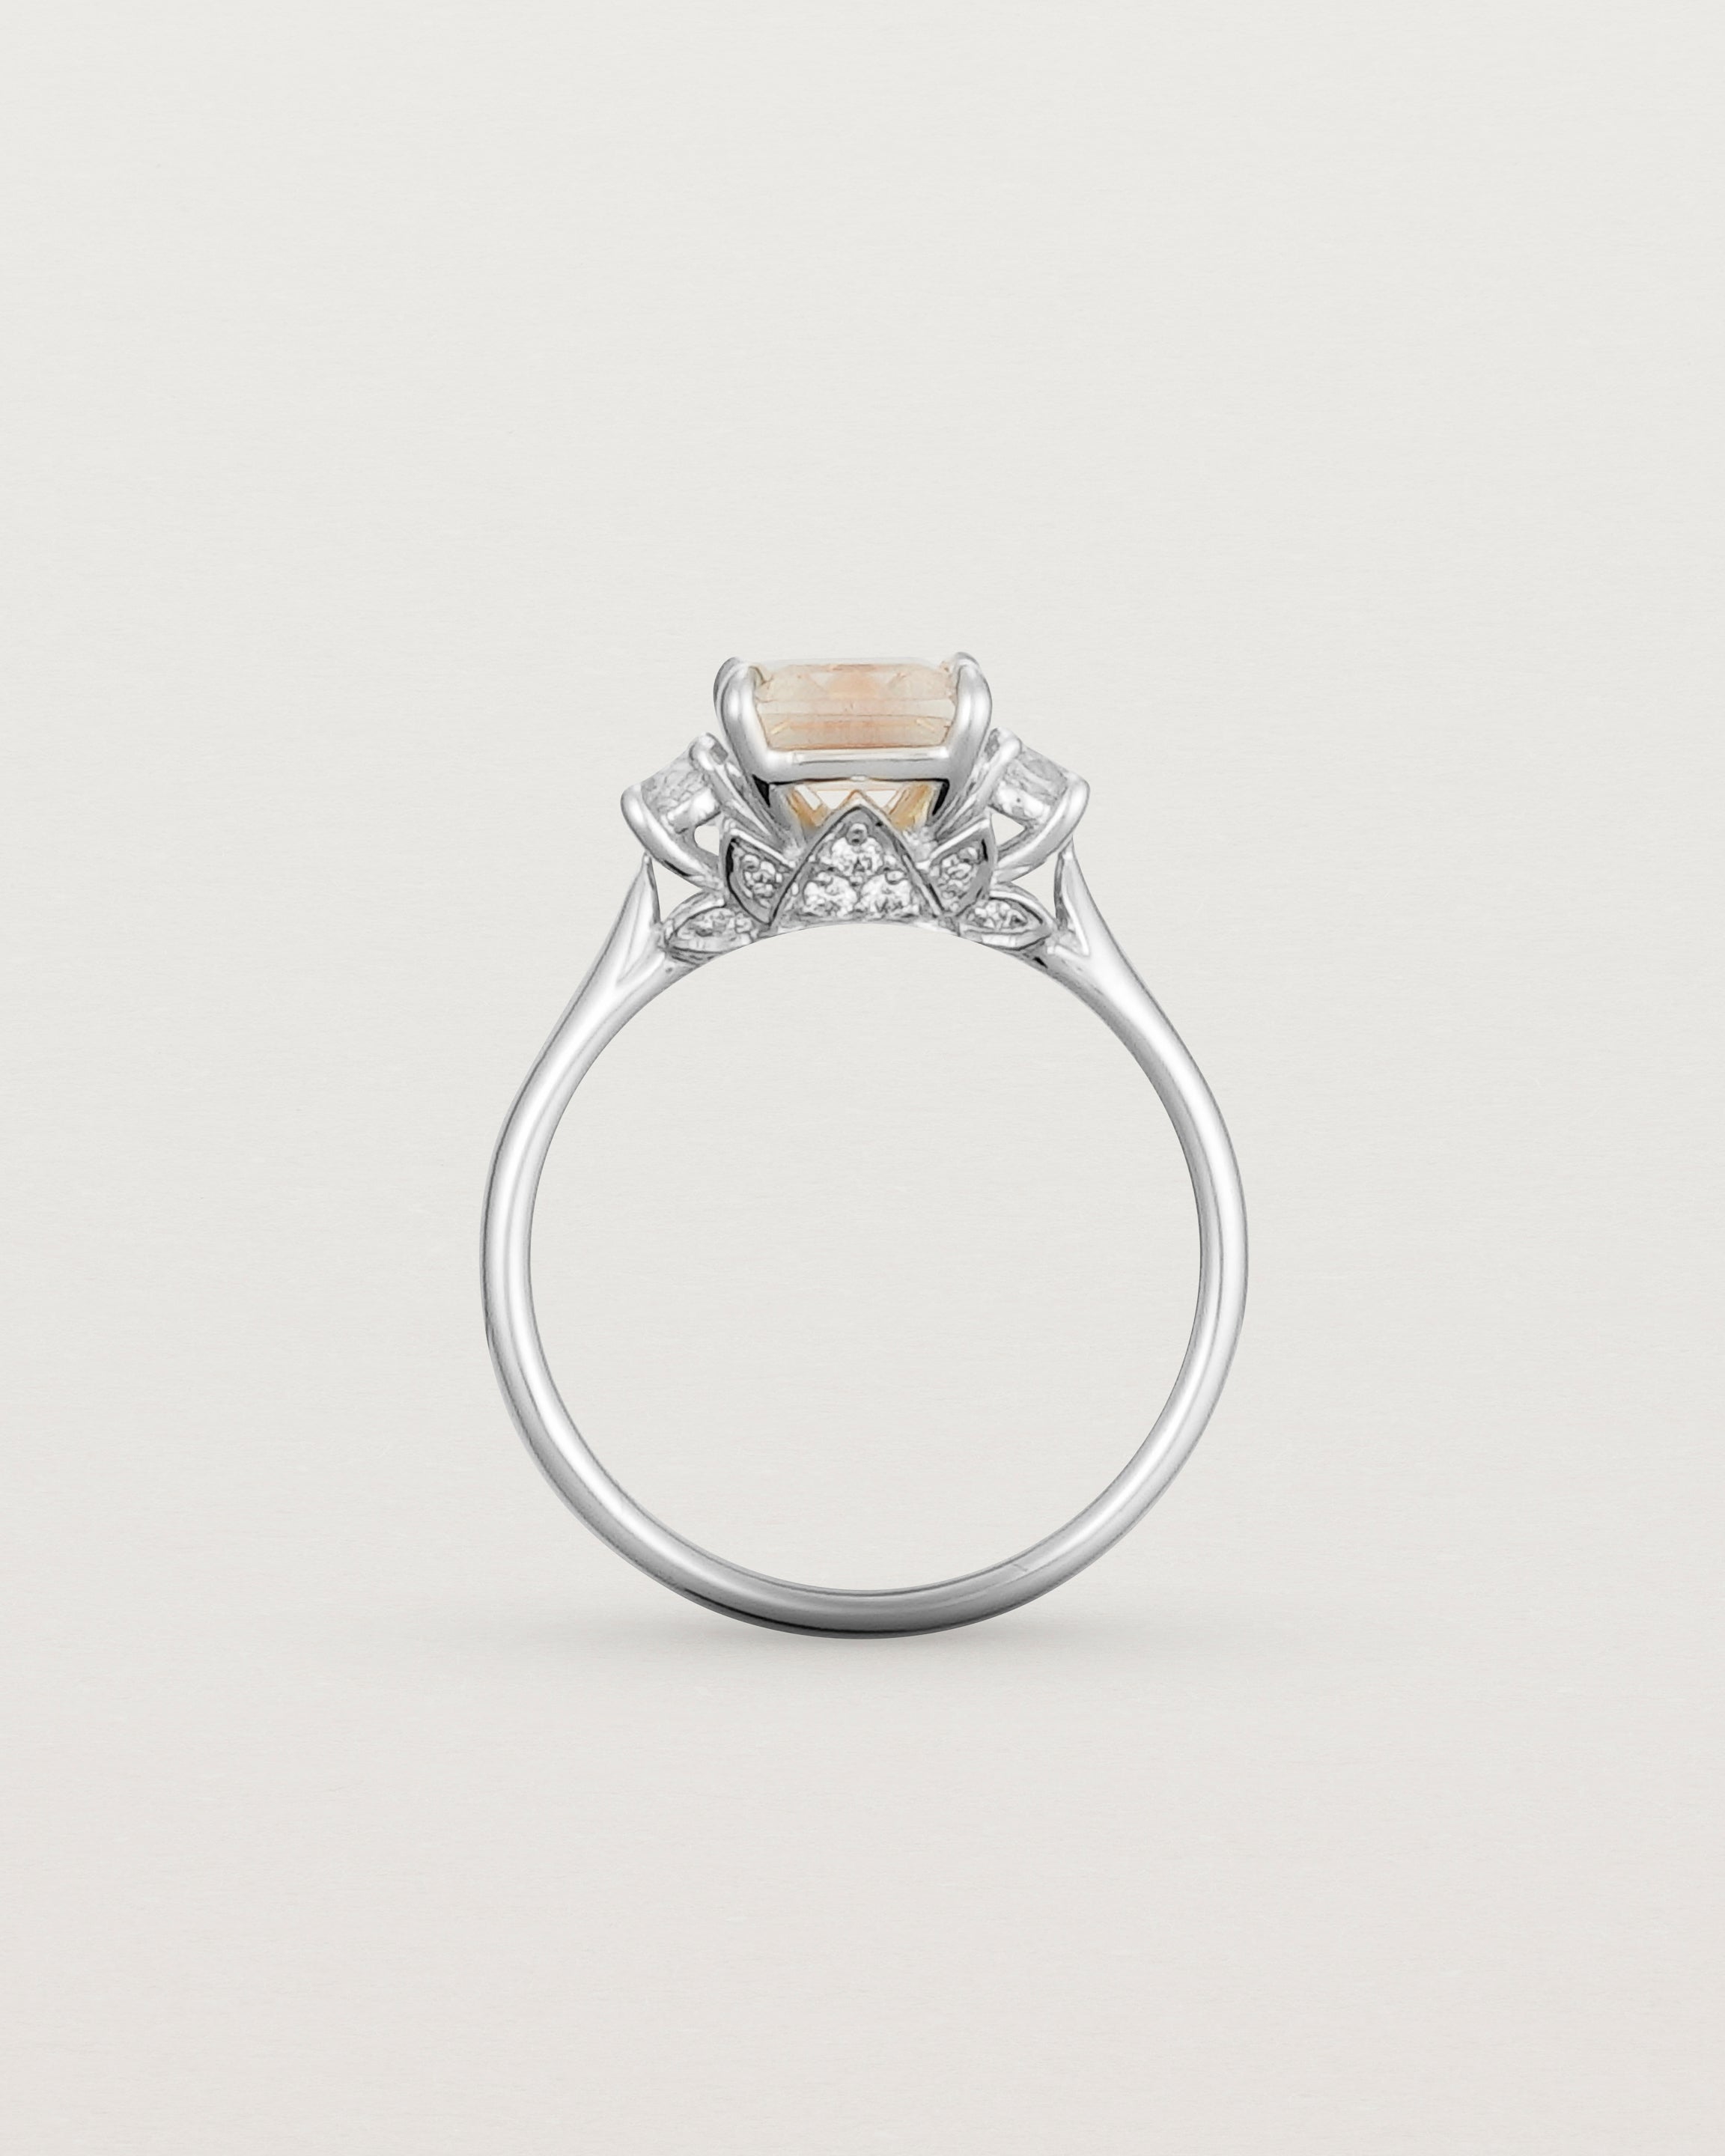 Standing view of the Laurel Emerald Trio Ring | Savannah Sunstone | White Gold.